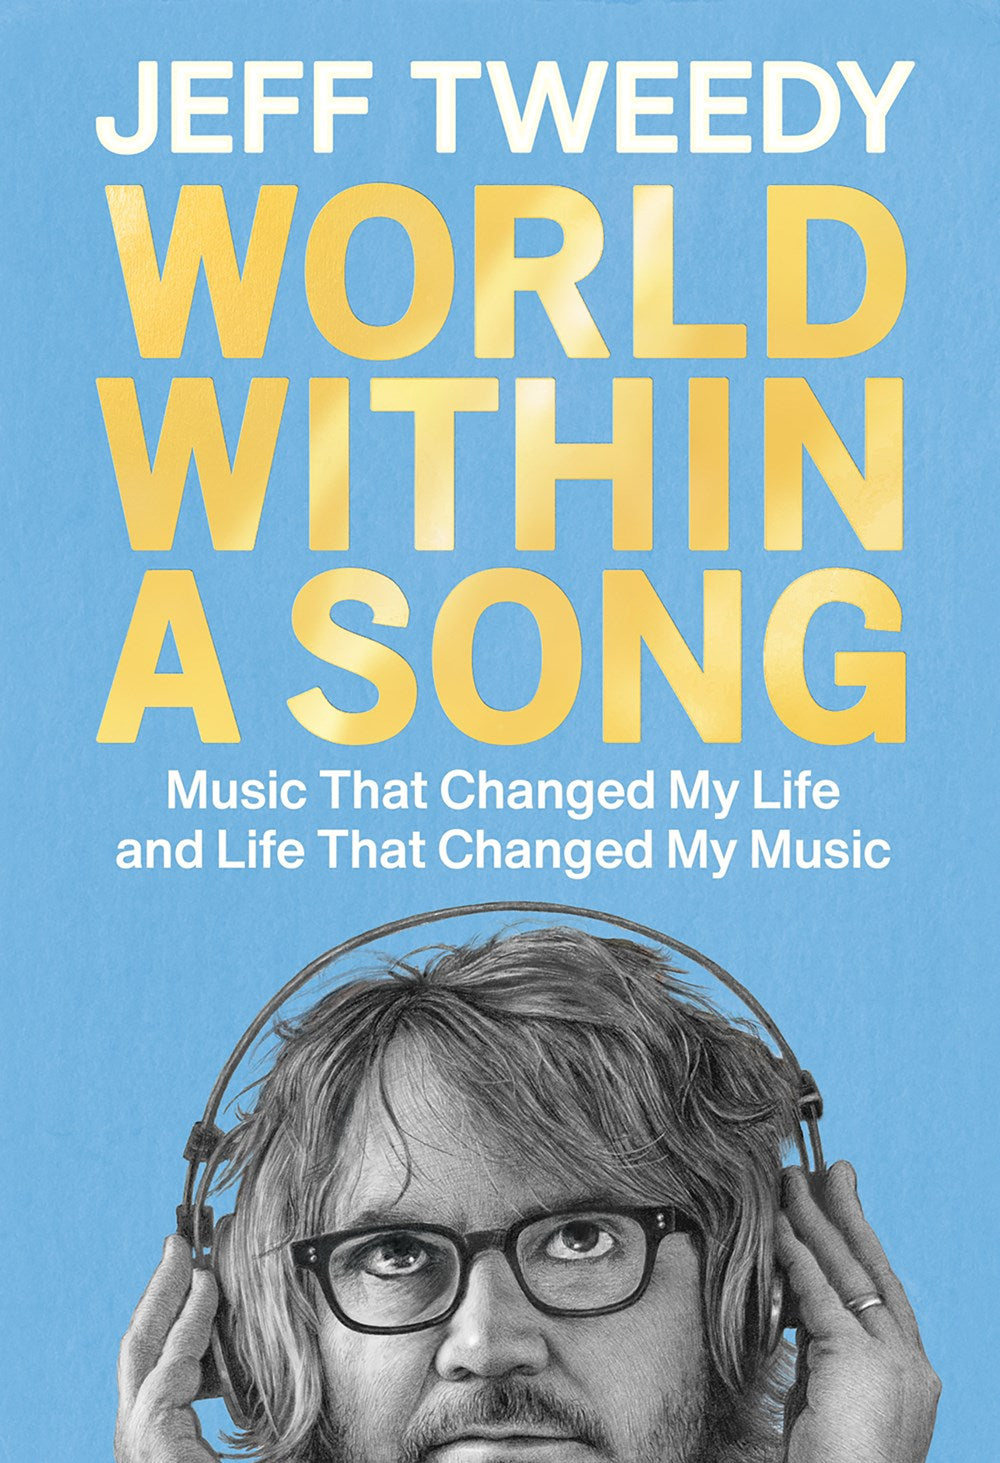 World Within A Song: Music that Changed My Life and Life that Changed My Music by Jeff Tweedy (11/7/23)